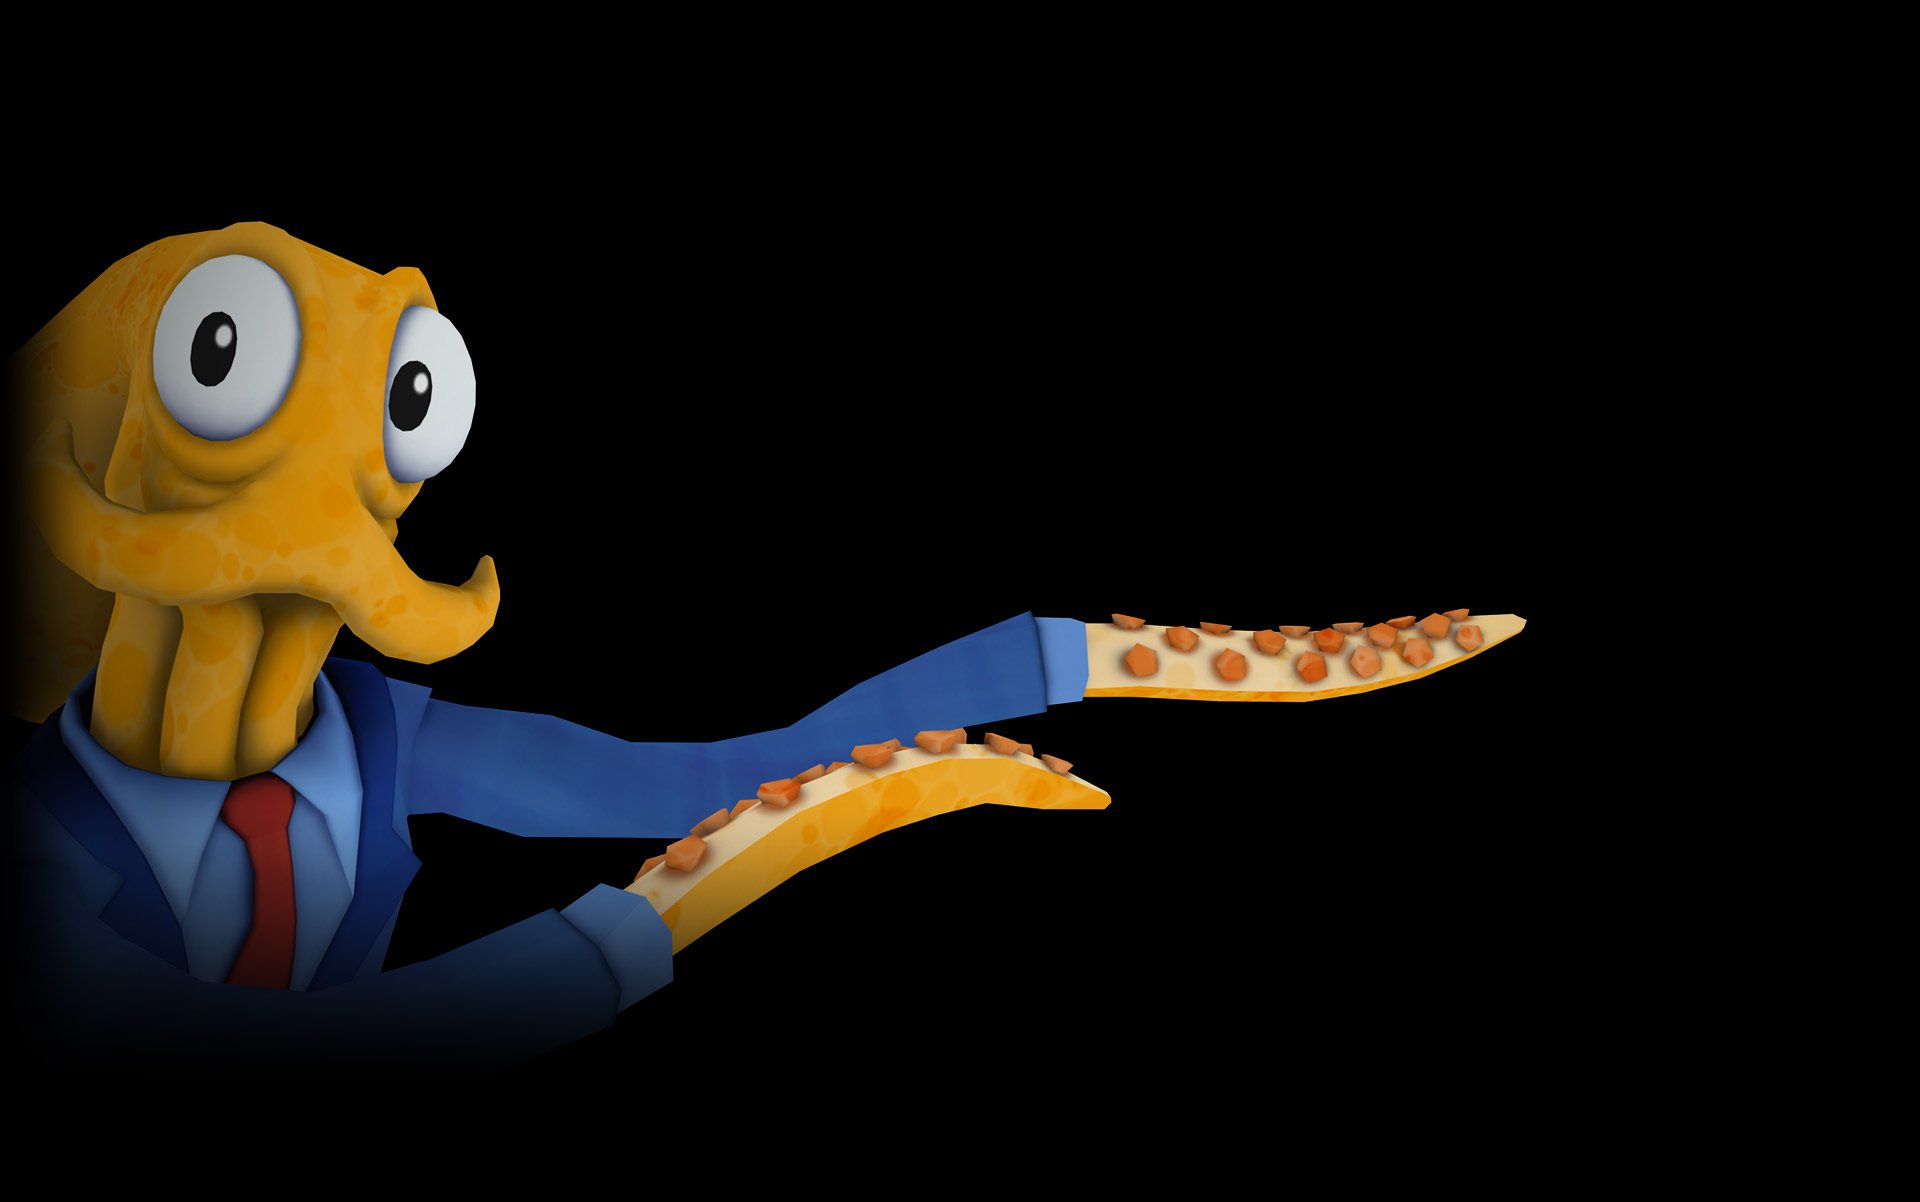 octodad dadliest catch free download with controller